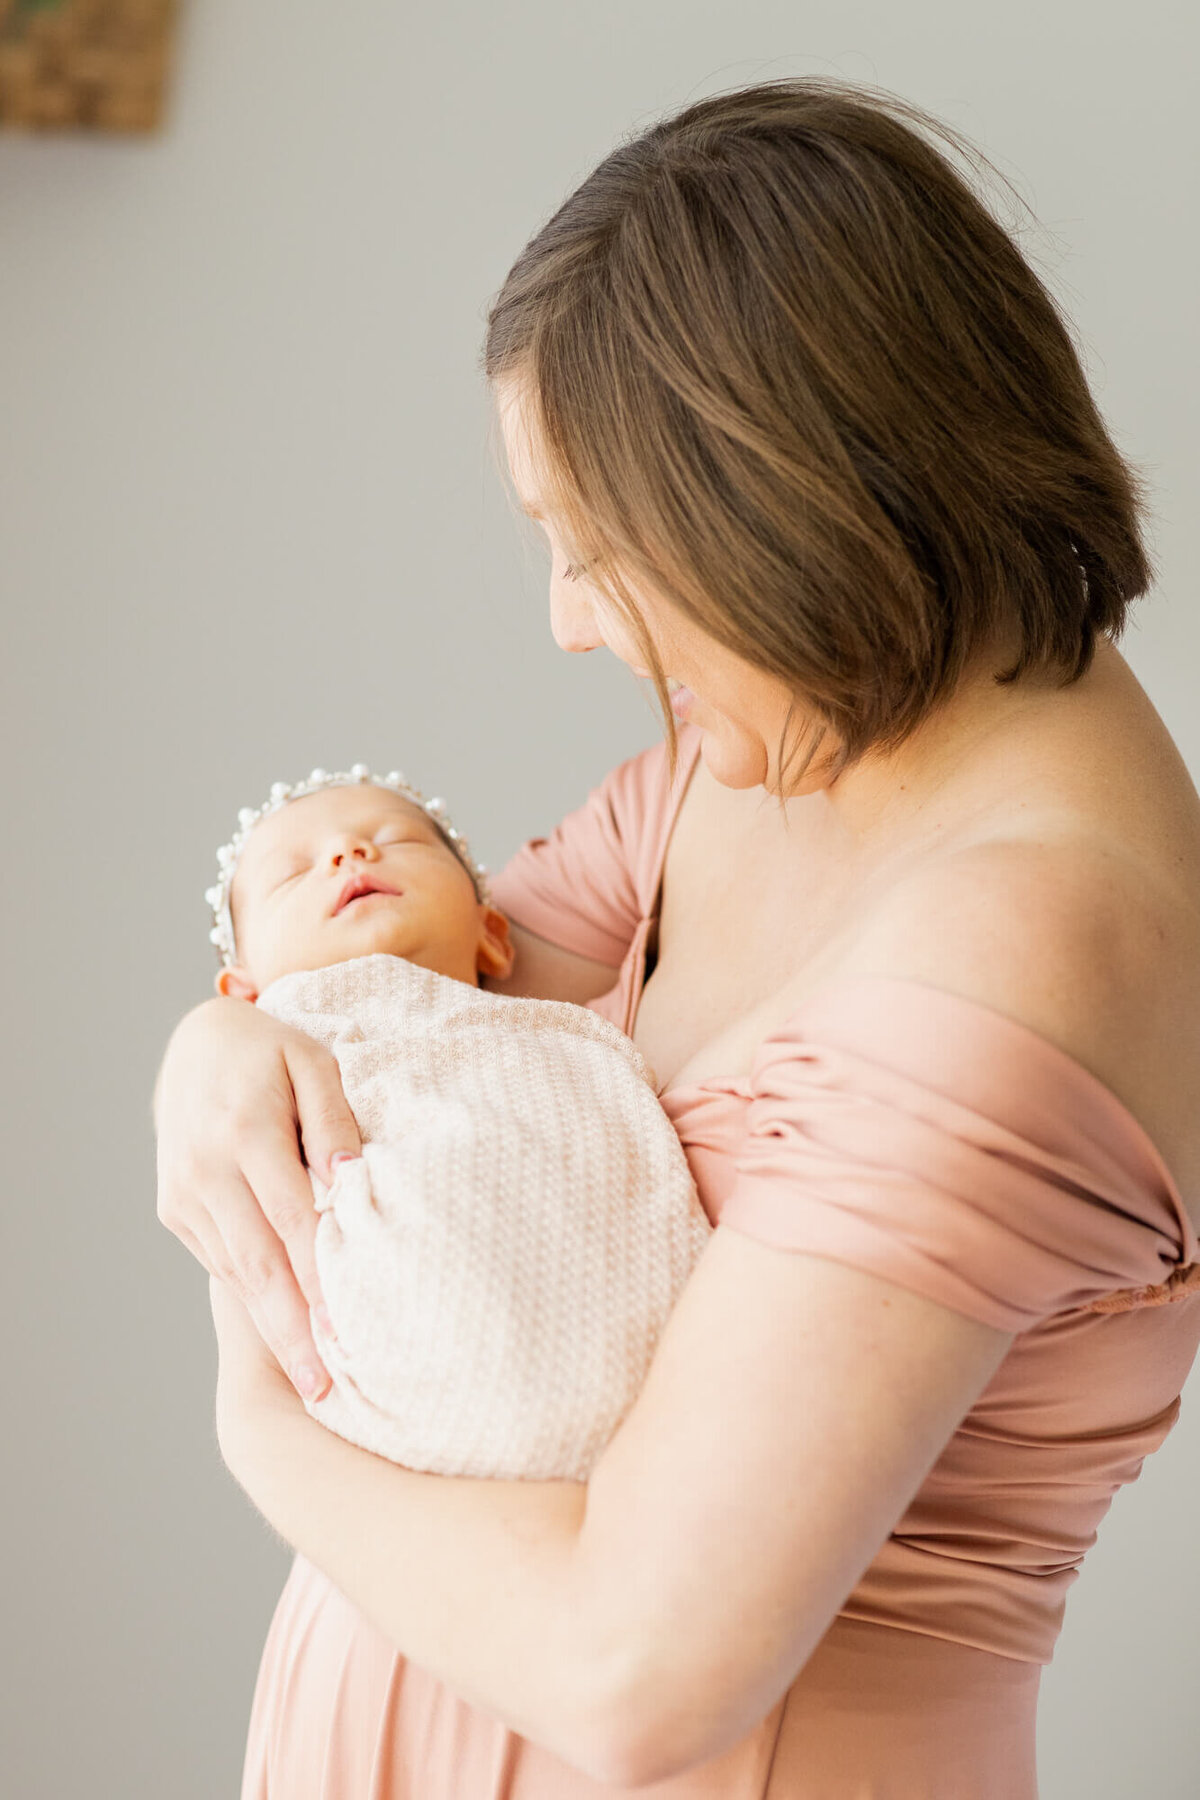 Mom in a peach dress stands and cradles her newborn baby girl